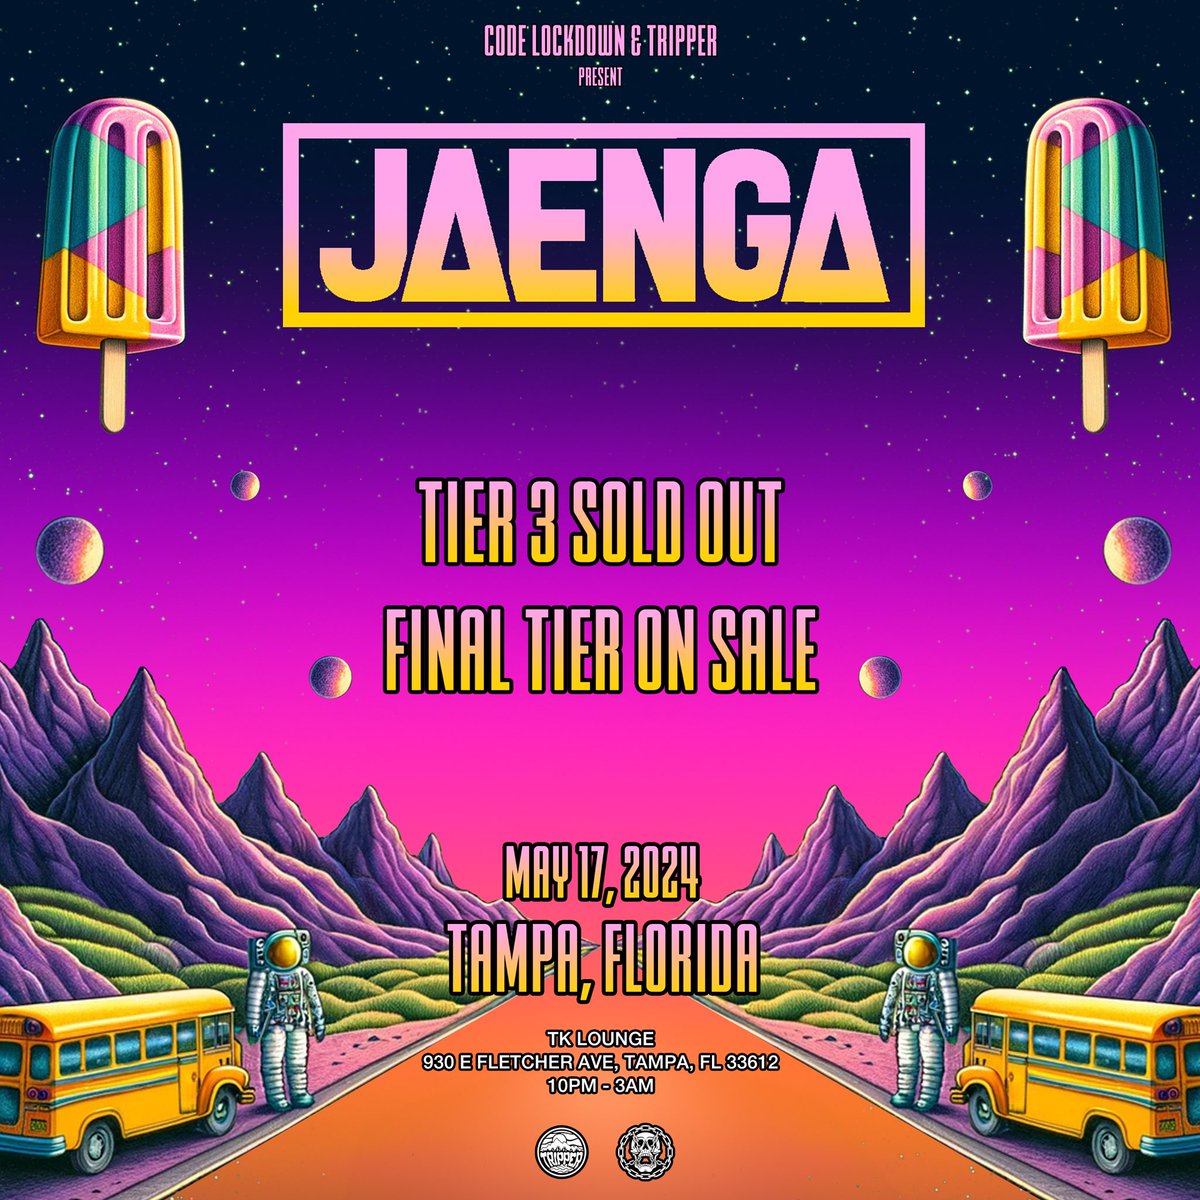 GET READY TAMPA 🎉 Tonight’s show is 95% SOLD OUT! Very limited FINAL TIER tix remain… Secure your tix sooner rather than later, or it may be too late! See you at 10pm 🥳